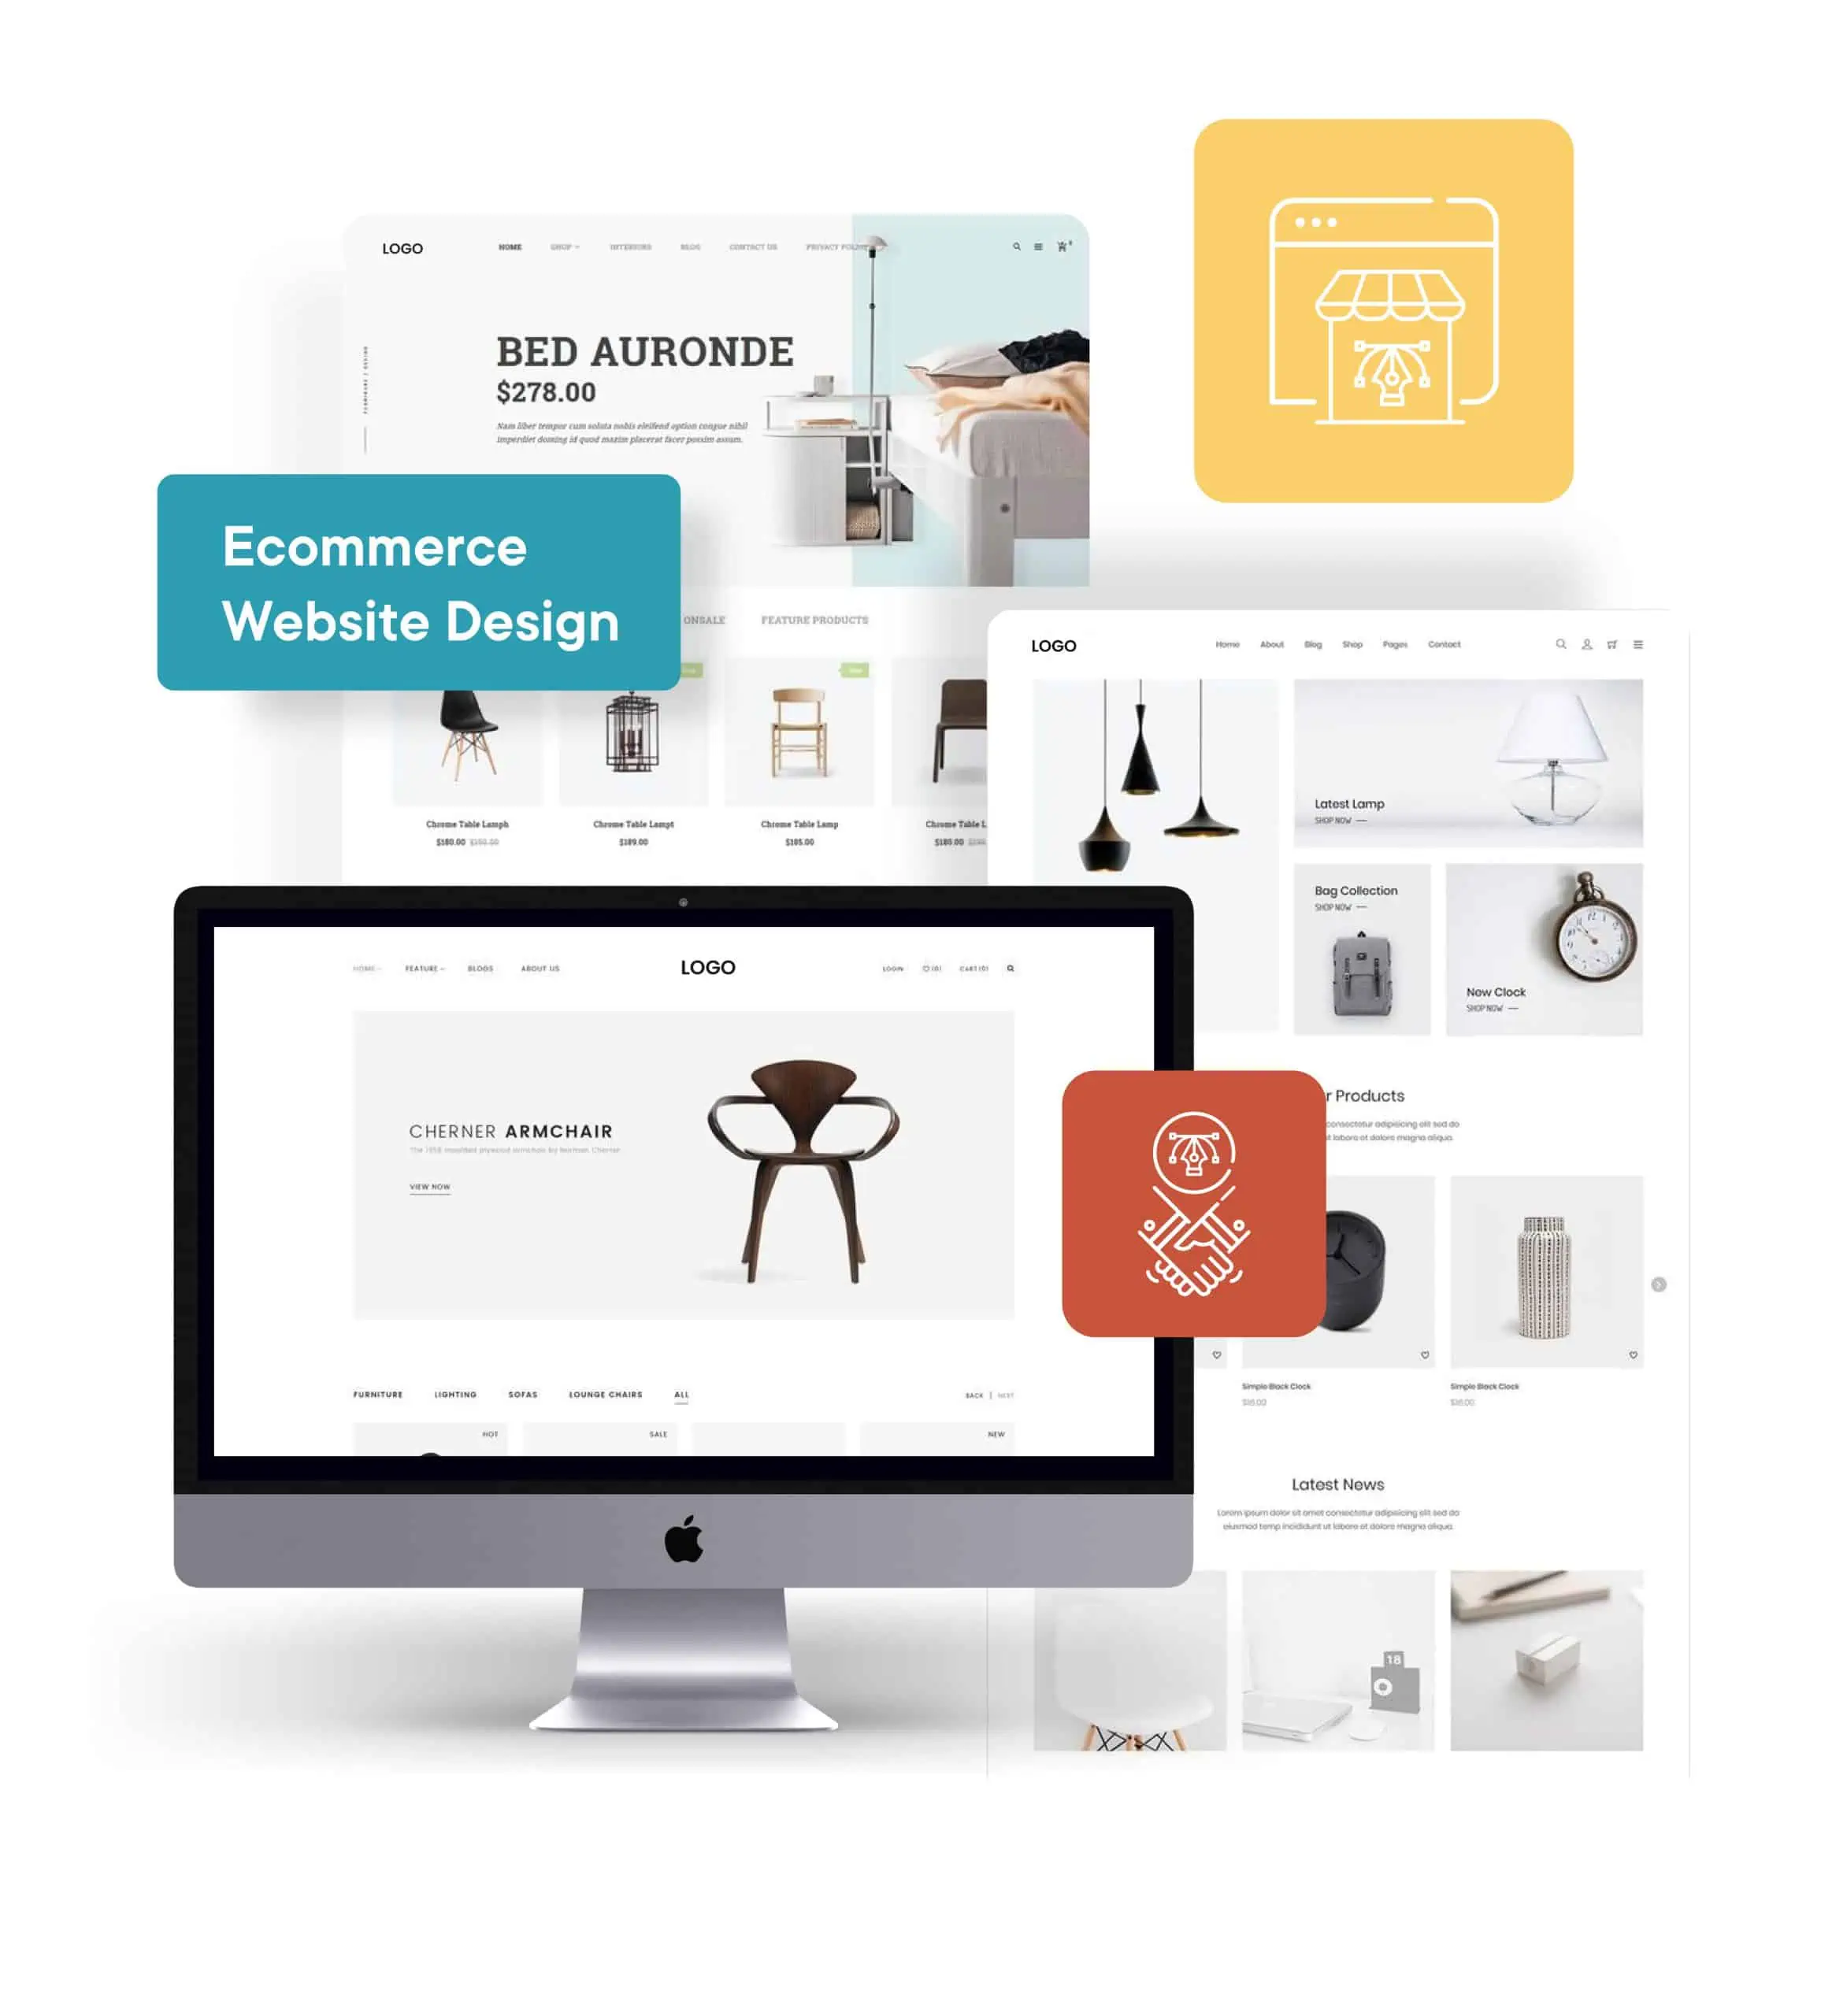 Ecommerce Design And Development Services | WPXStudios